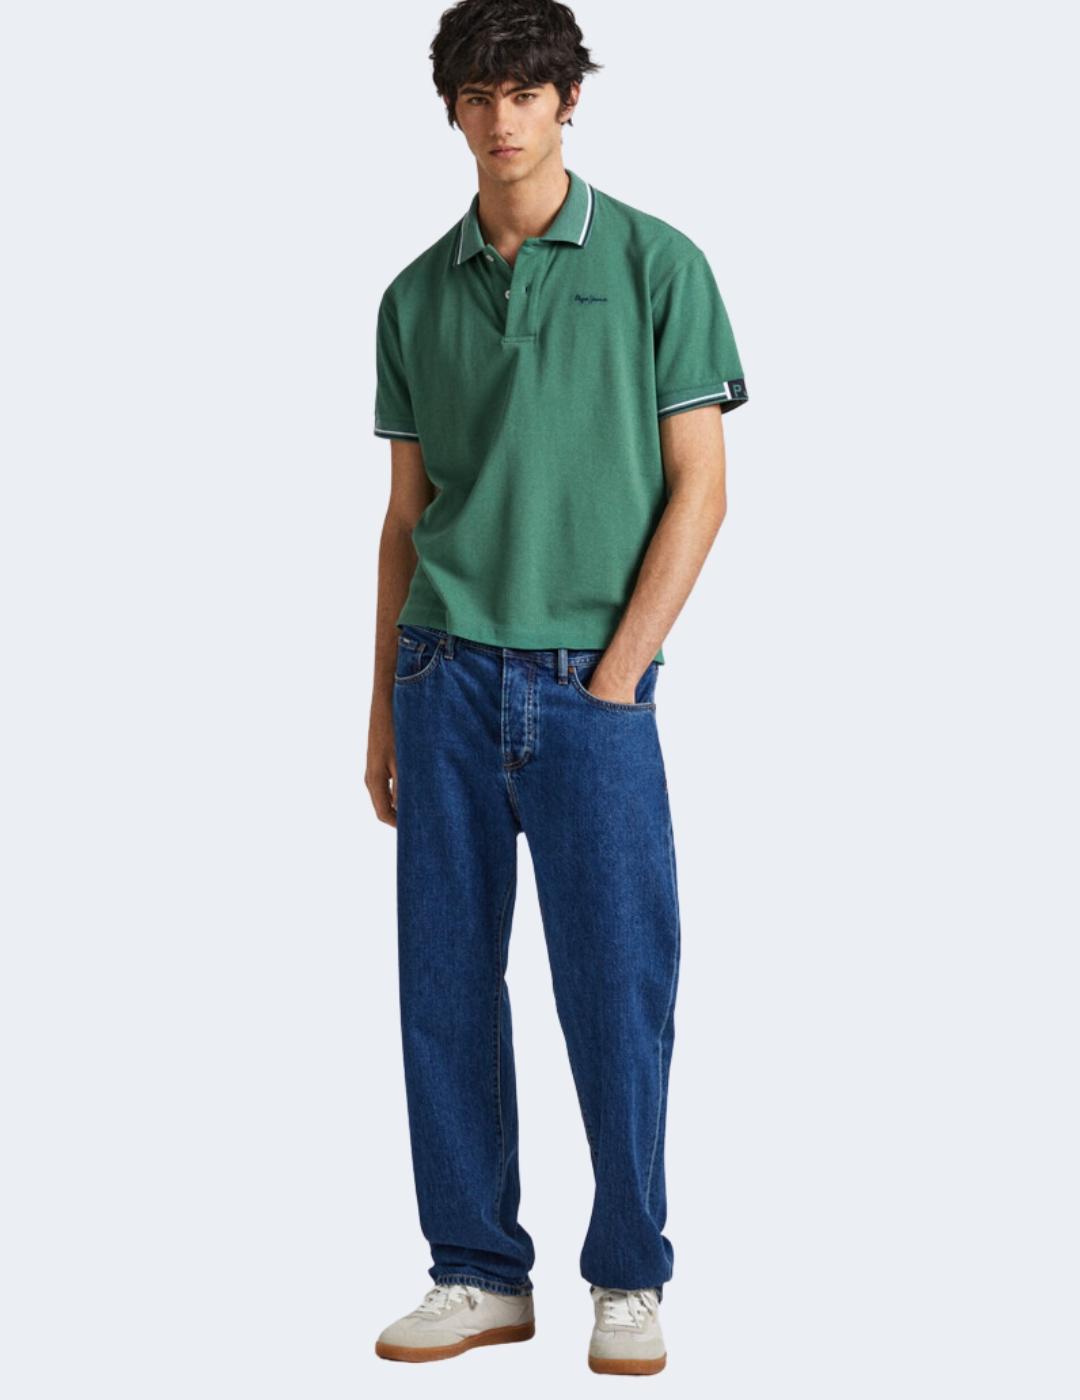 Polo Pepe Jeans Hombre Harley Verde